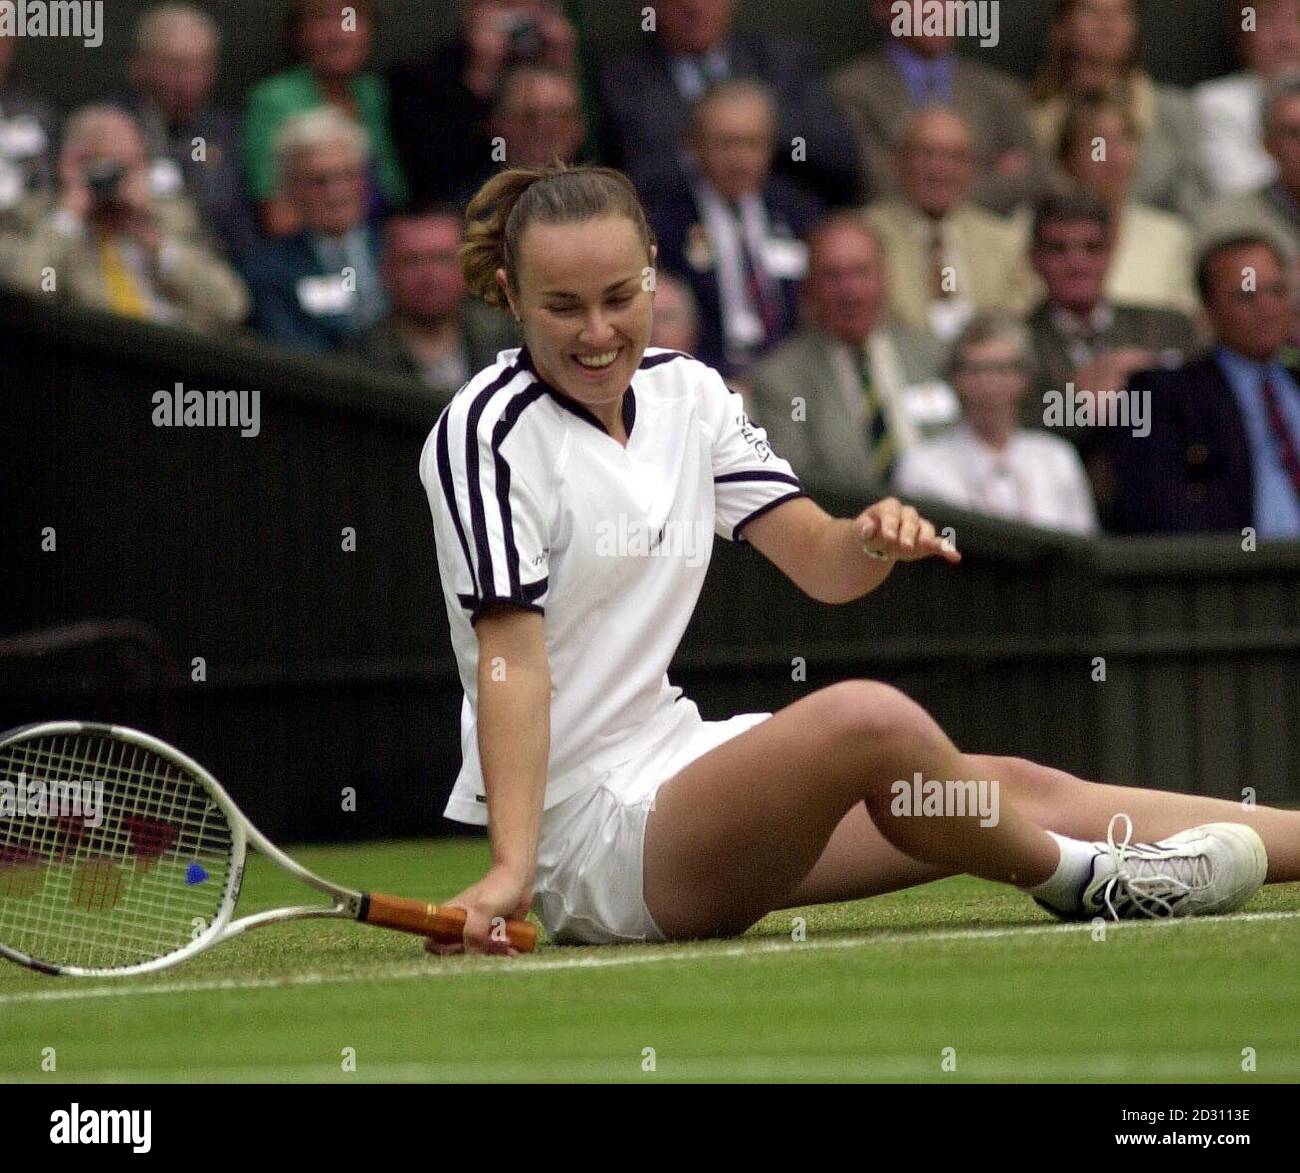 NO COMMERCIAL USE: Switzerland's Martina Hingis smiles after falling ...